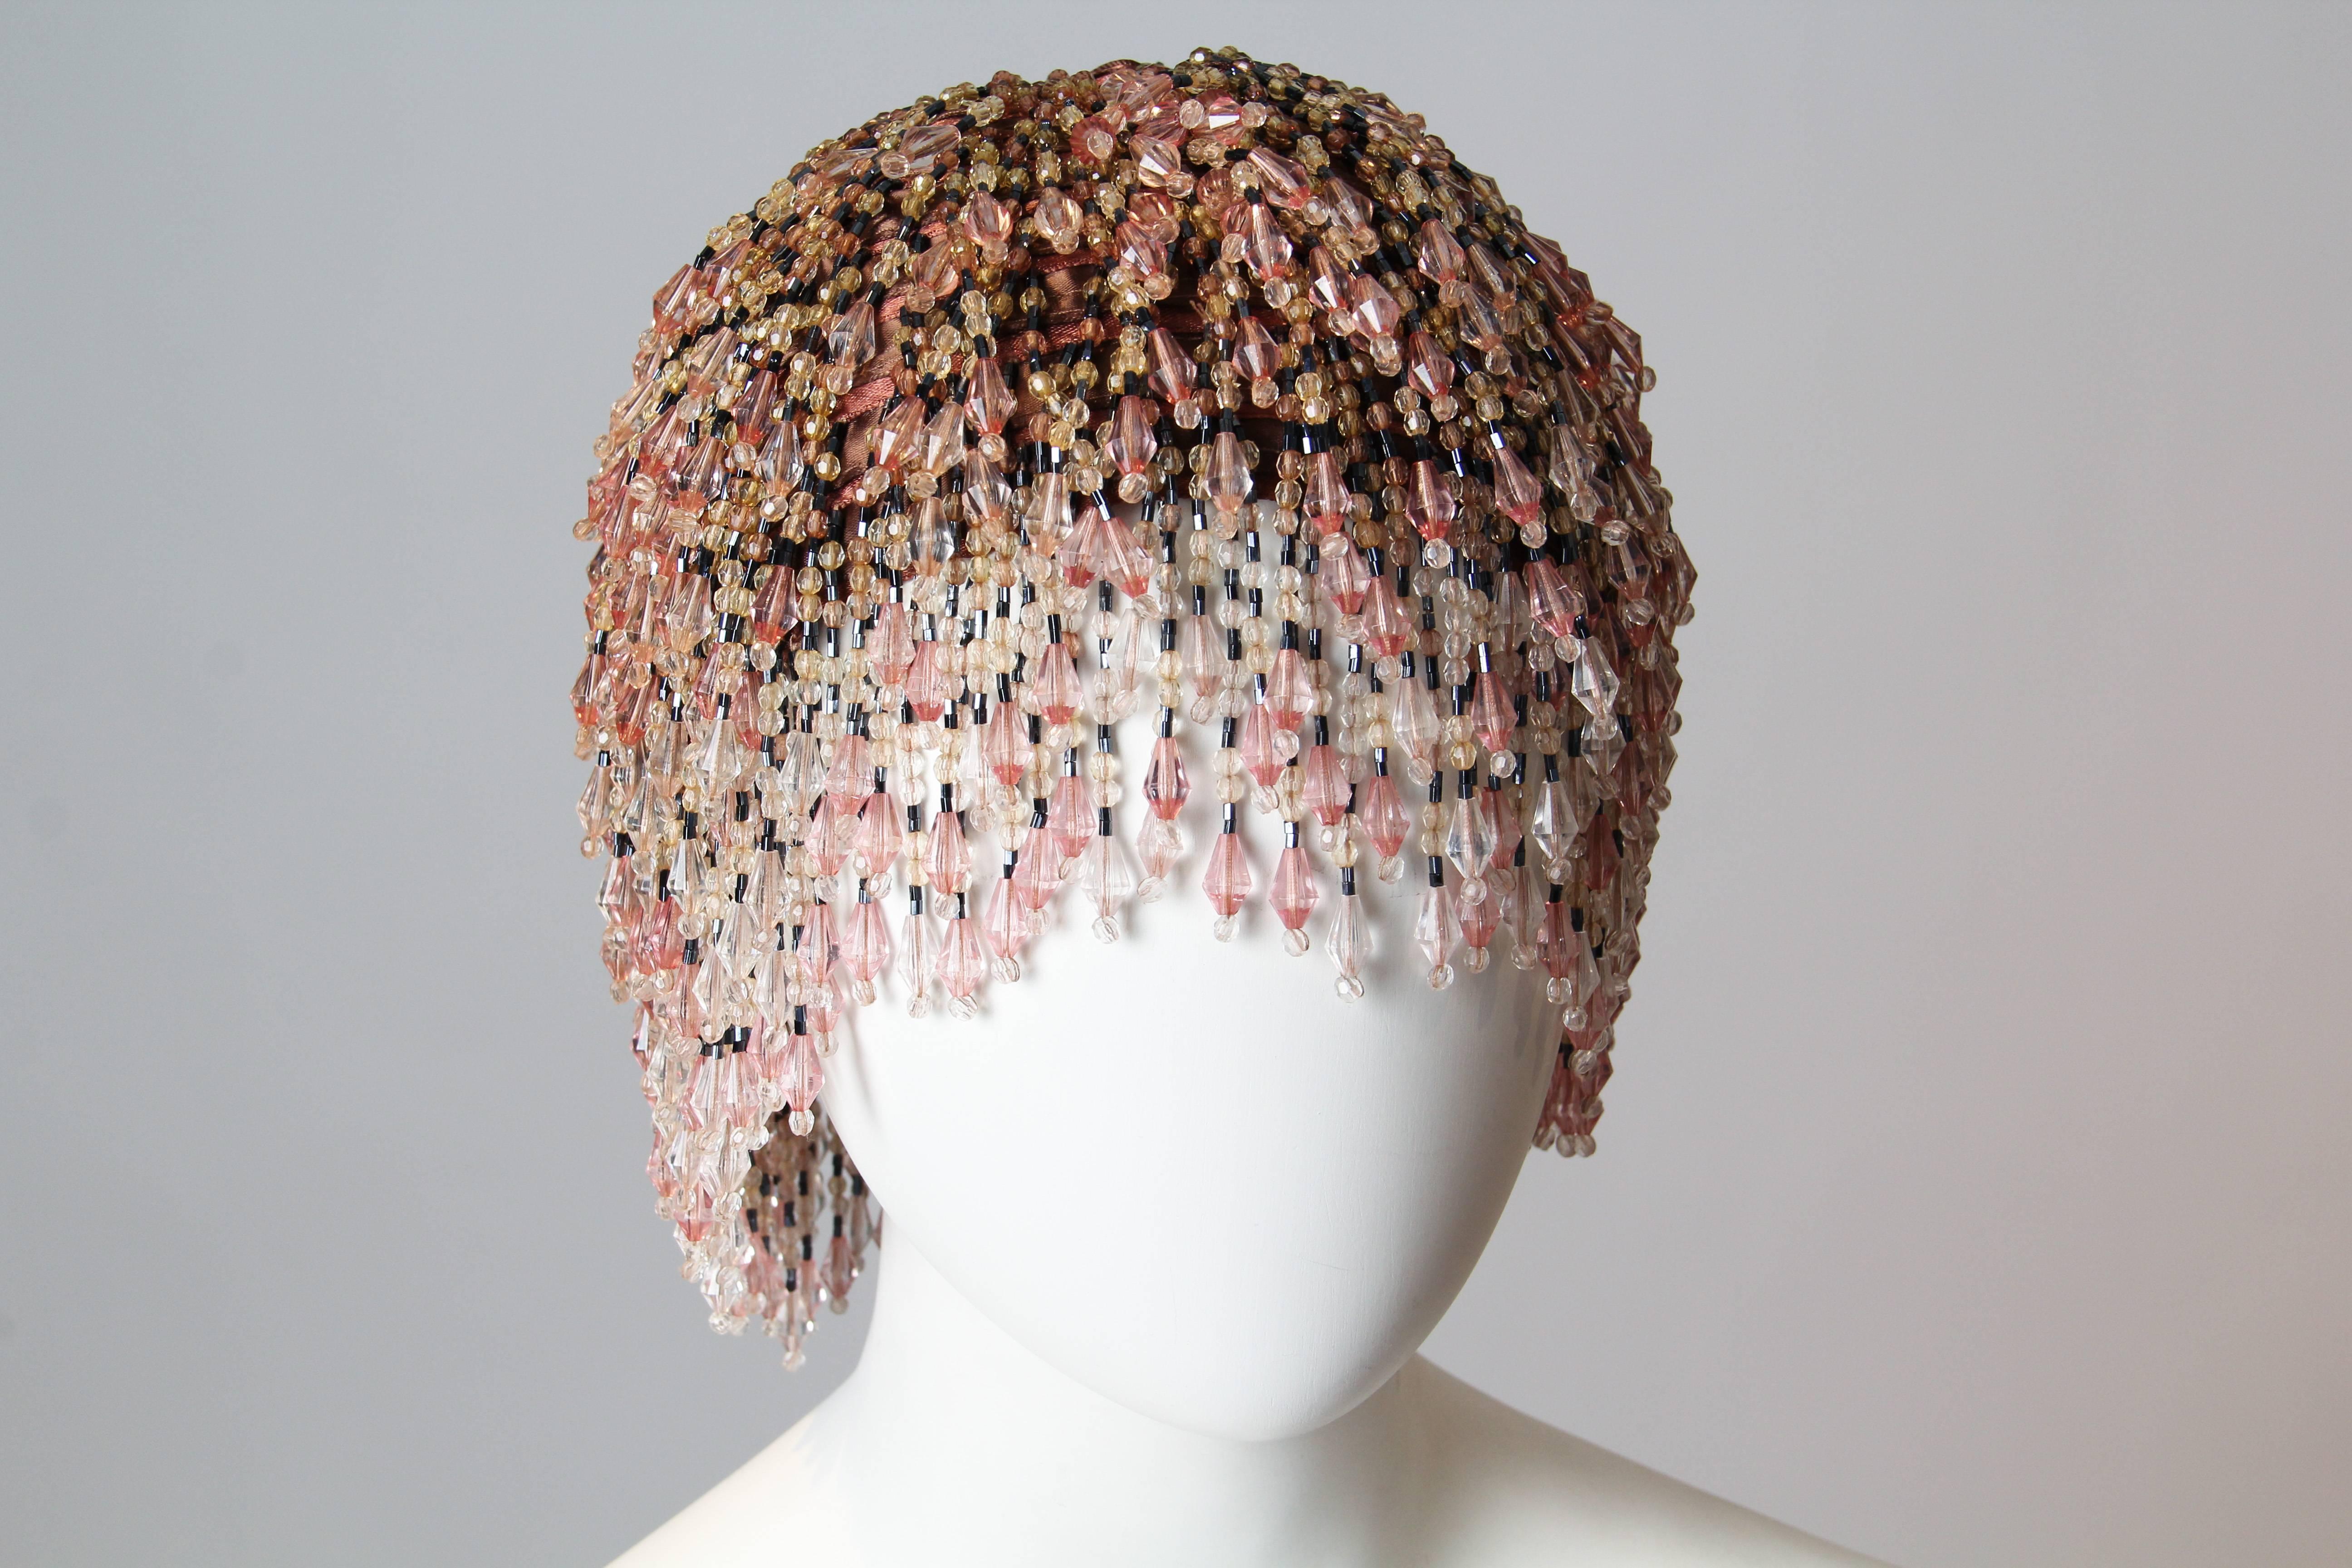 This is an incredible beaded headdress, inspired by the flapper headdress from the 1920s. The Jazz Age was a time of never-before-seen freedom and exuberance for women especially, as the post-war economy boom and the widespread scofflaw glee of